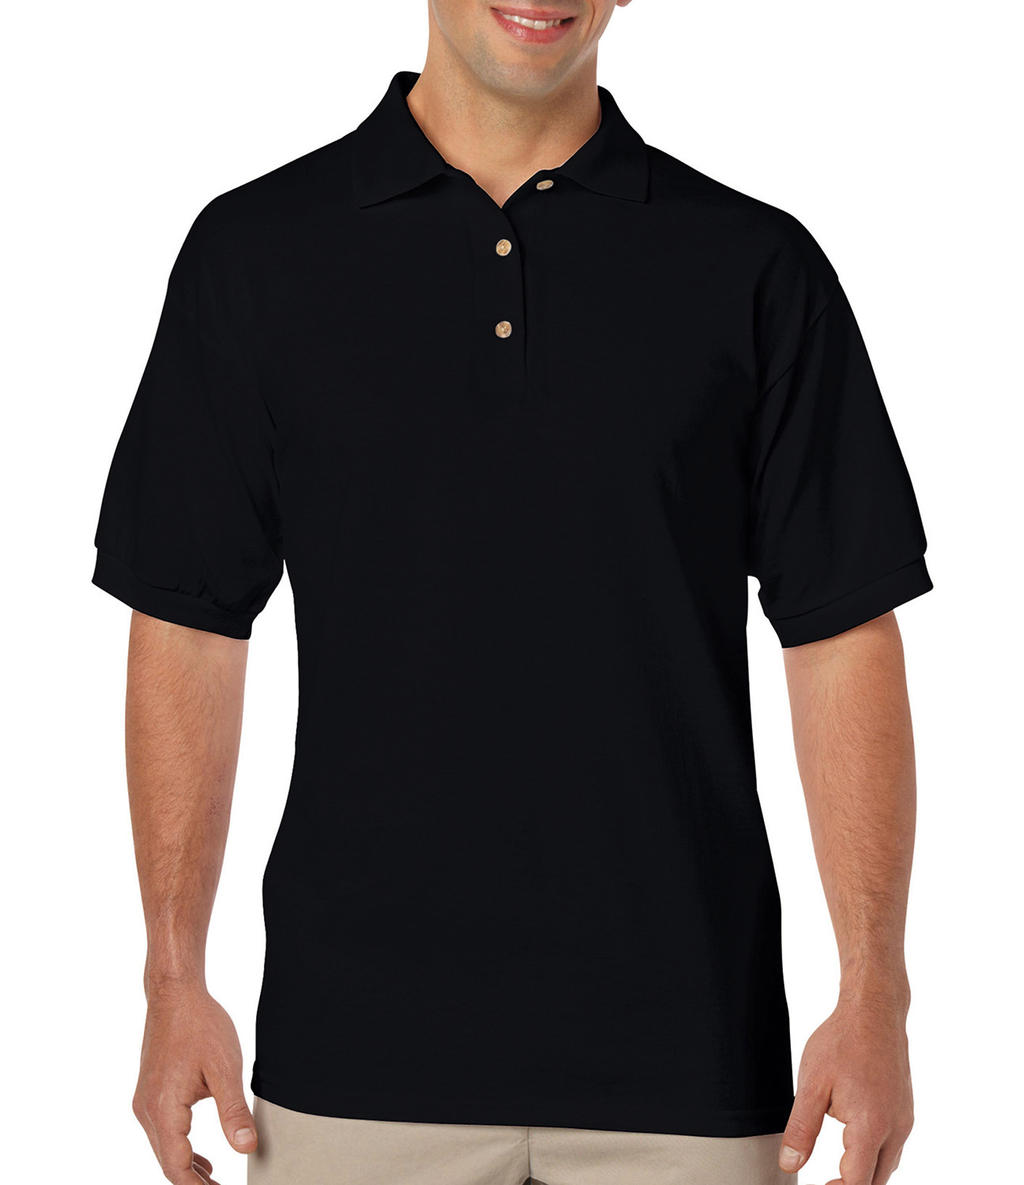  DryBlend Adult Jersey Polo in Farbe Black